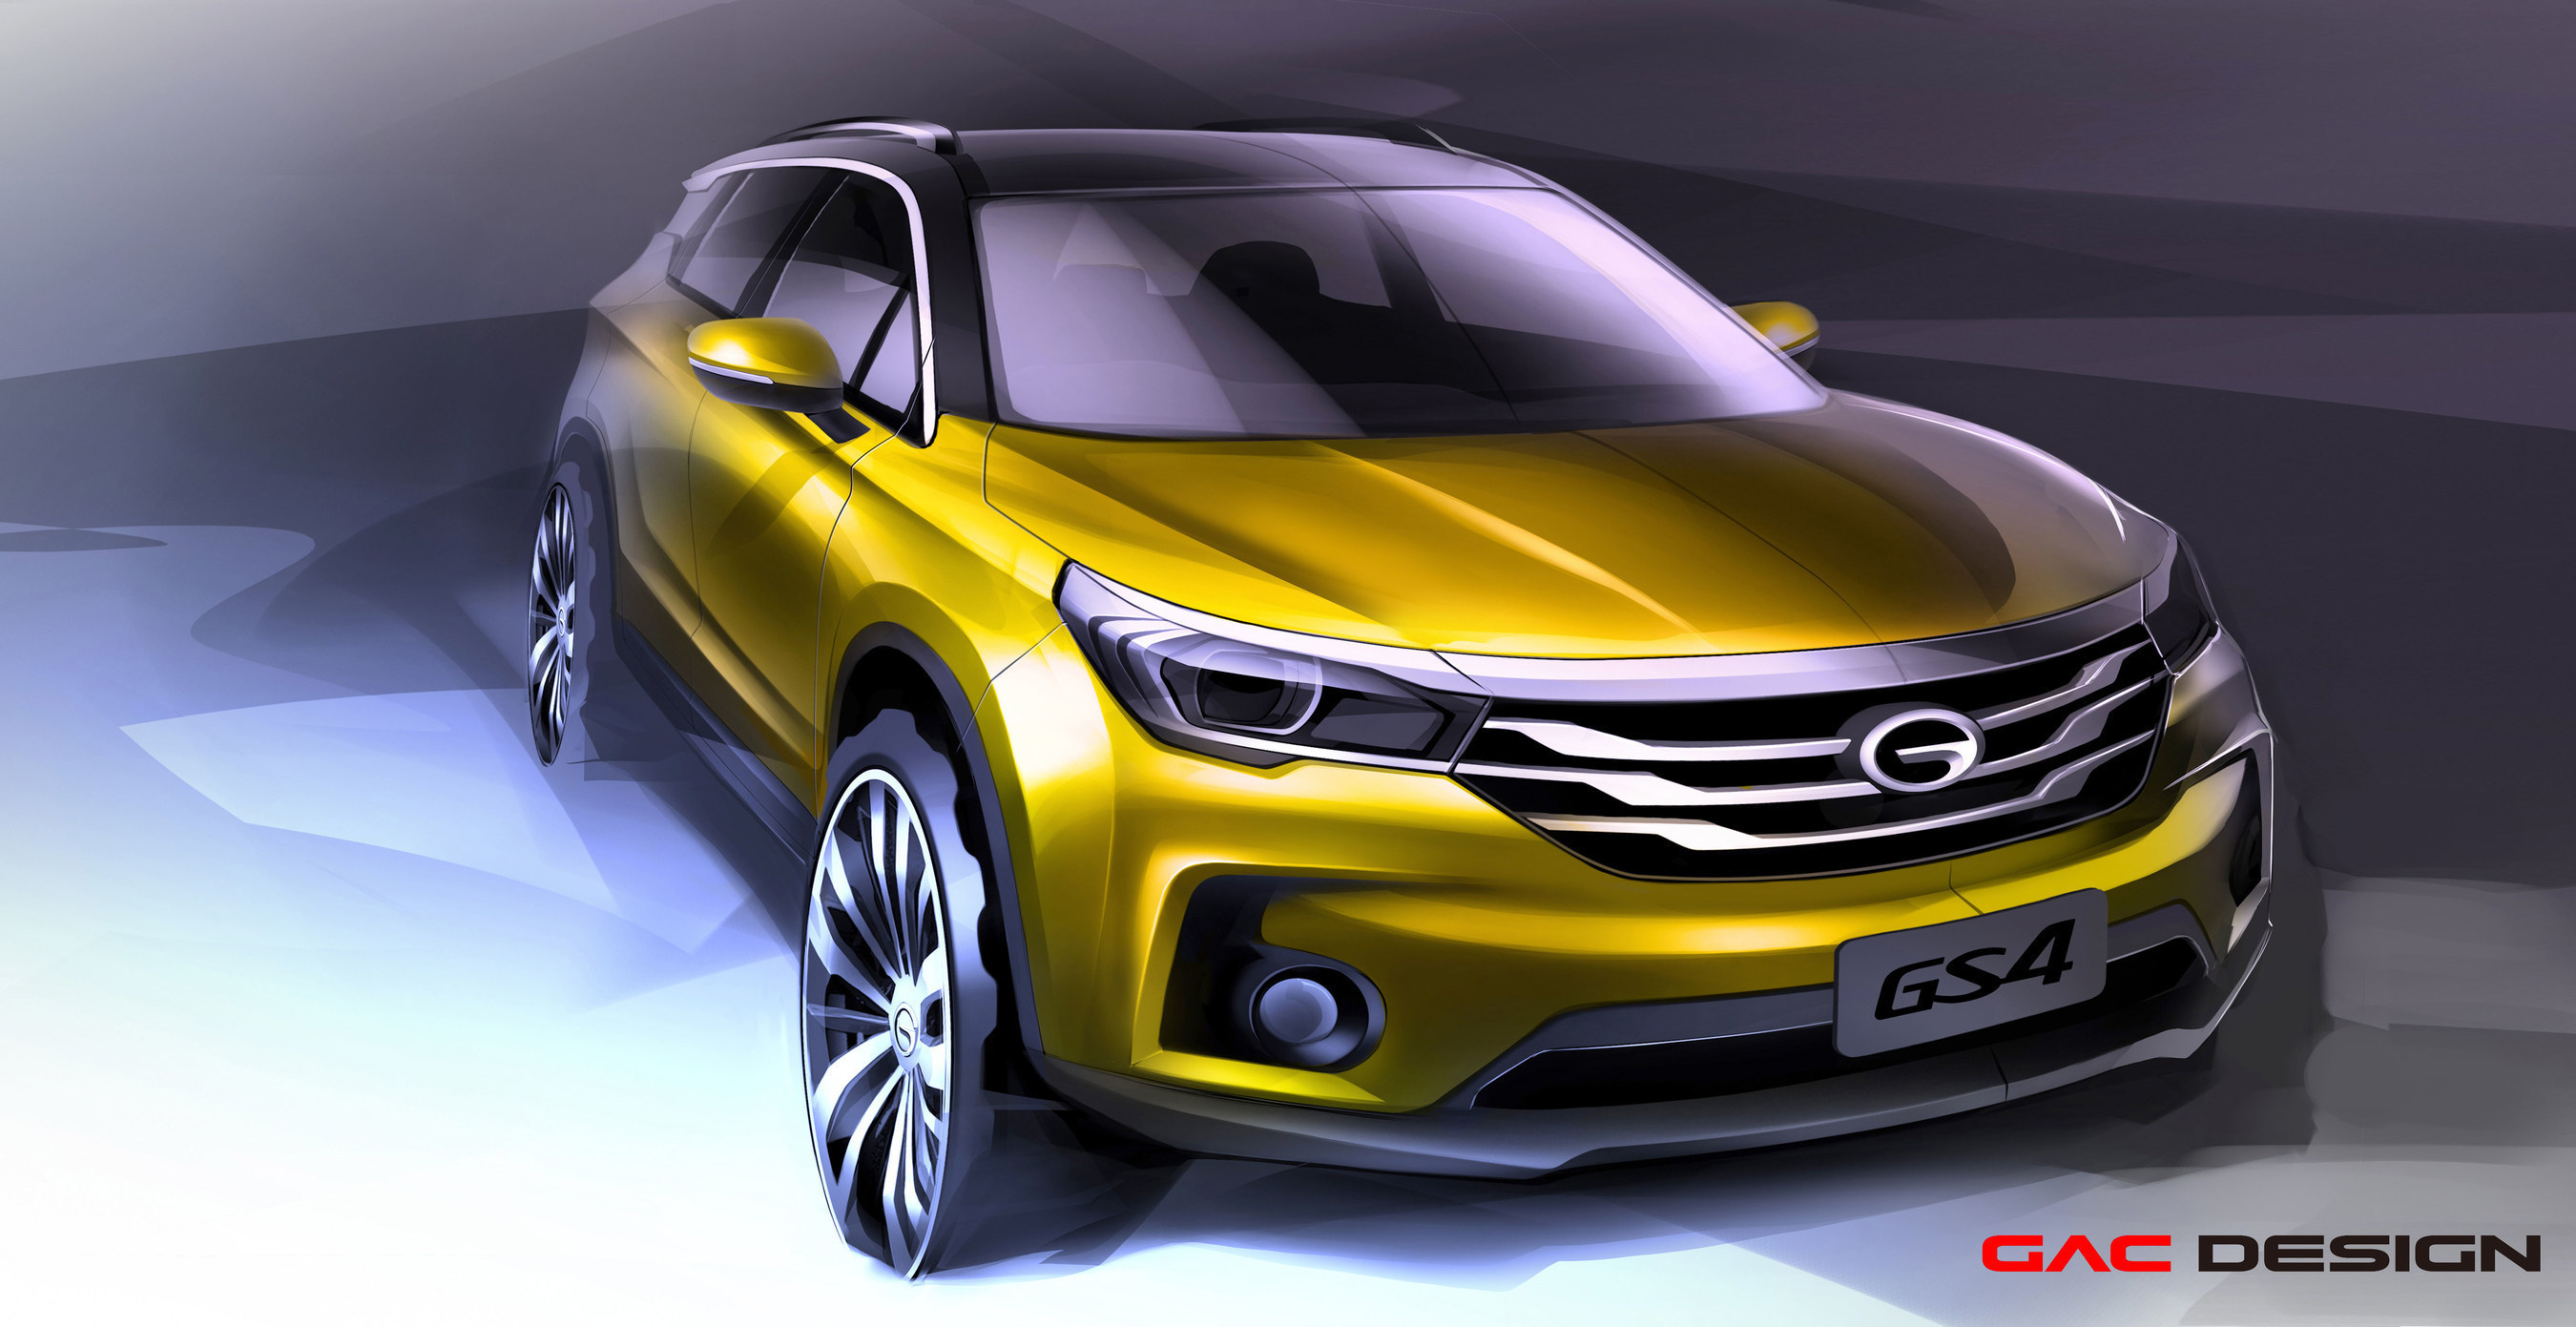 GAC Motor to Unveil Brand New GS4 in Detroit, Quickening Globalization Drive